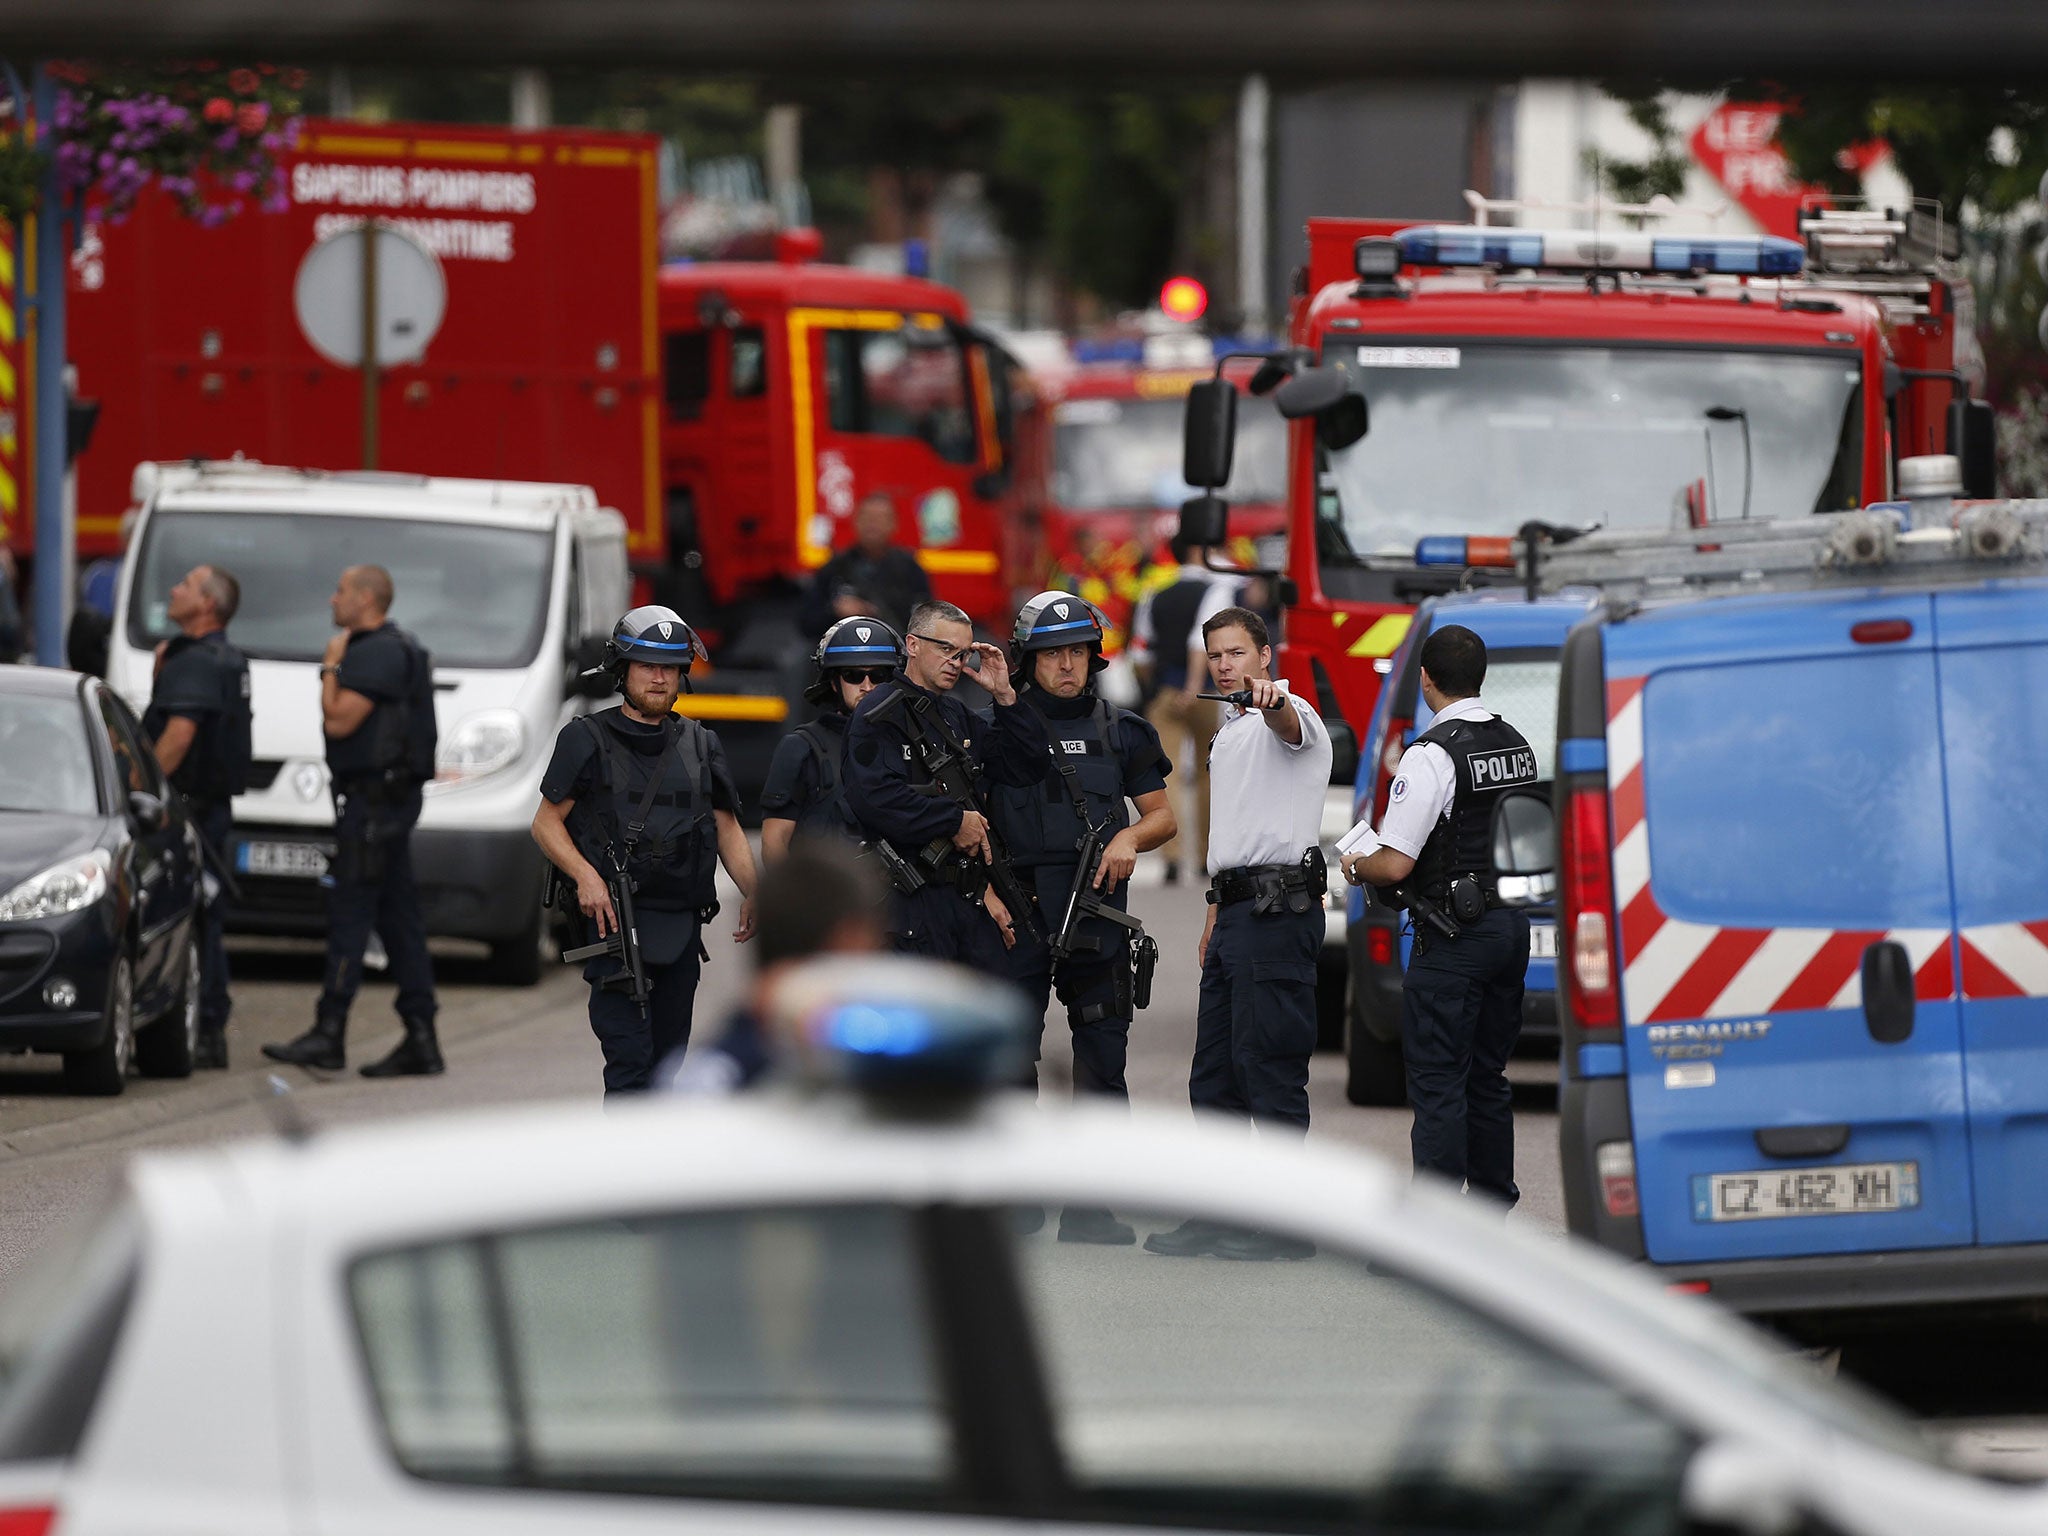 French police at the scene of the attack on a church in Saint-Etienne-du-Rouvray, northern France, on July 26